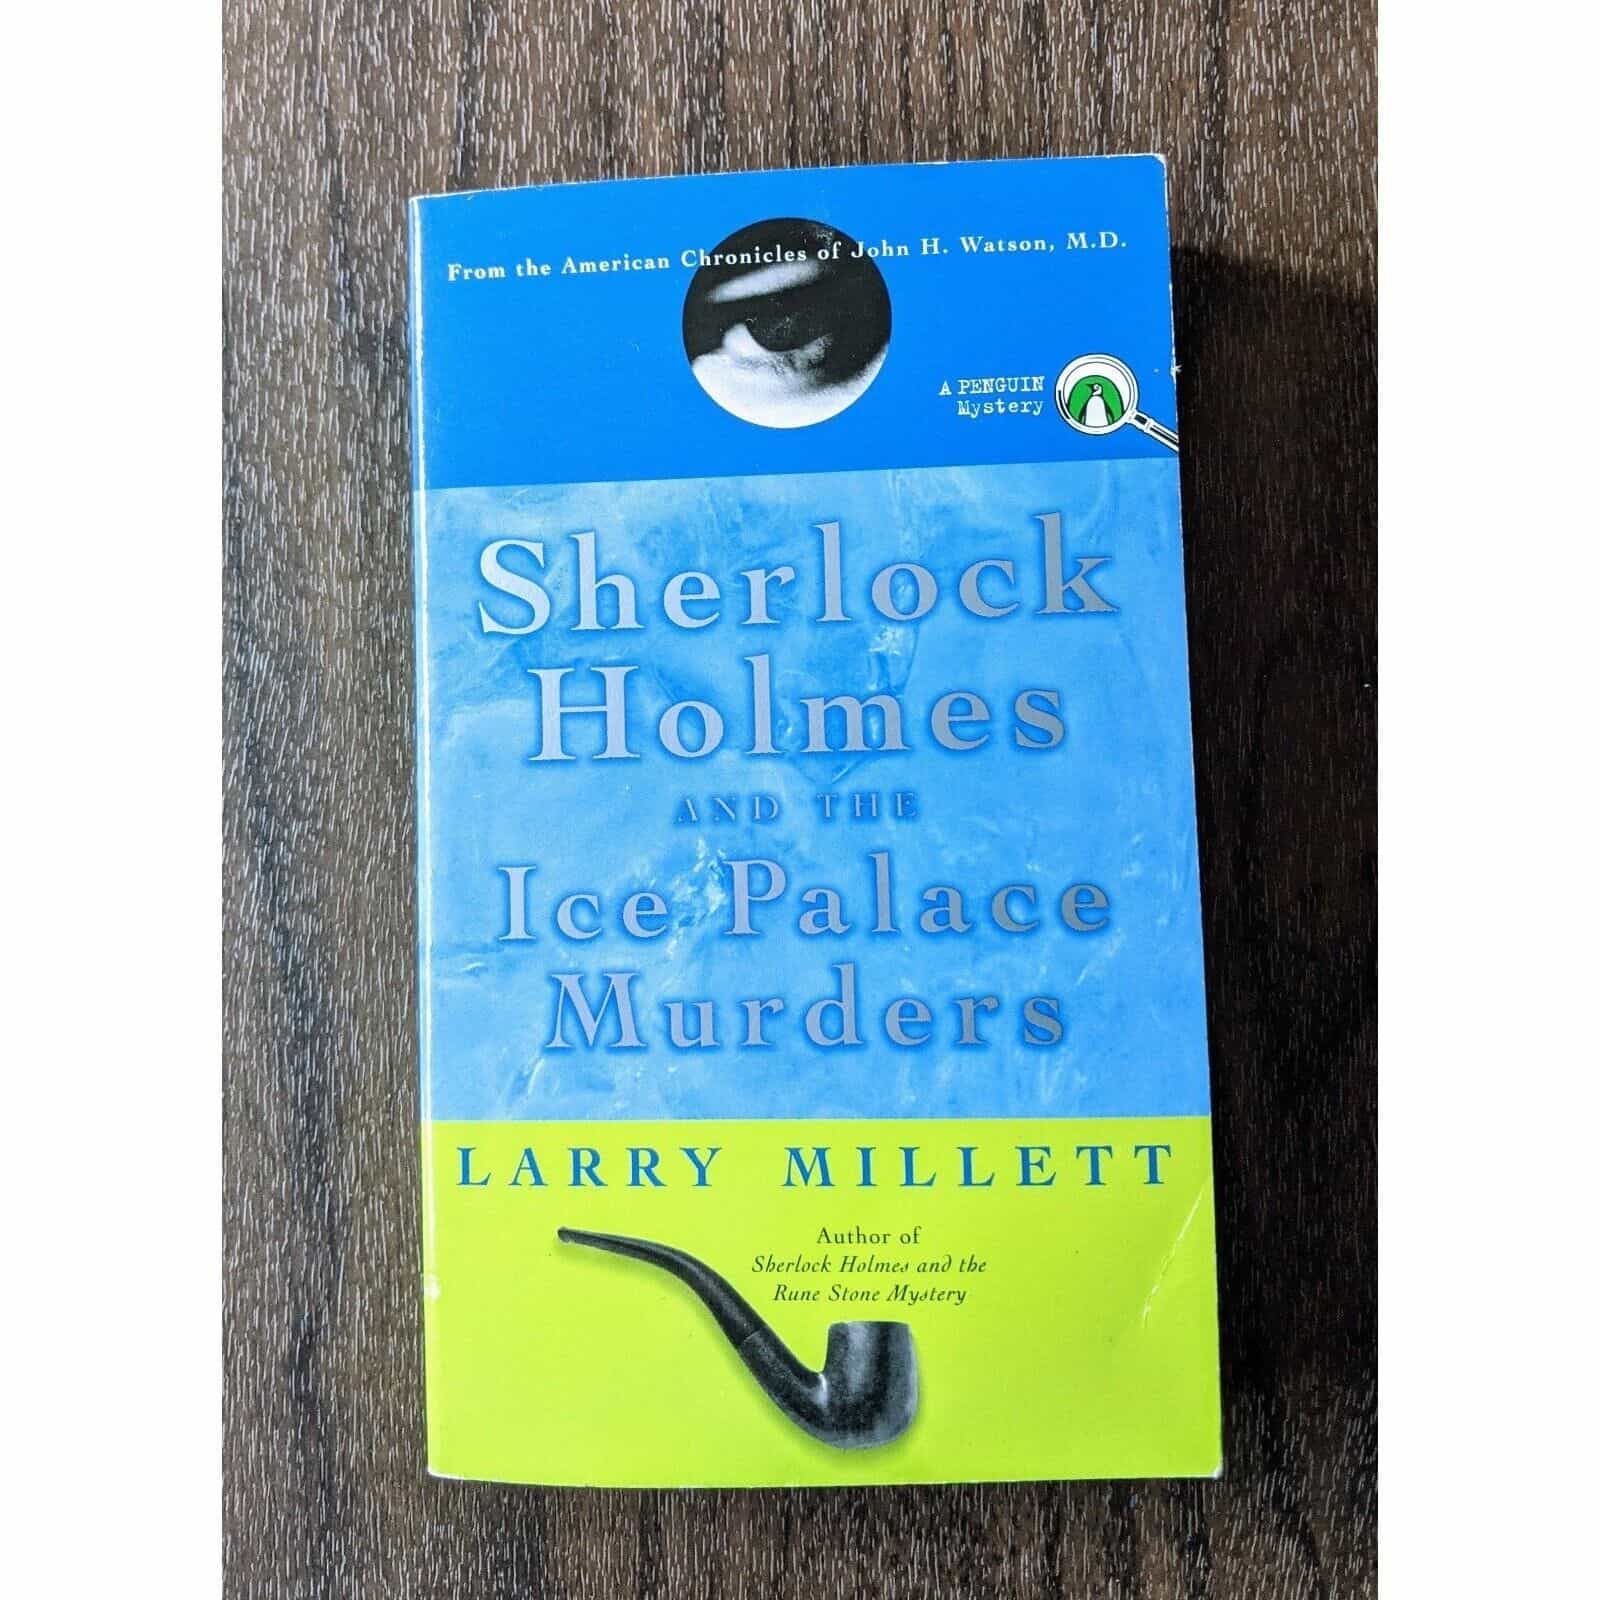 Sherlock Holmes And The Ice Palace Murders by Larry Millett Book